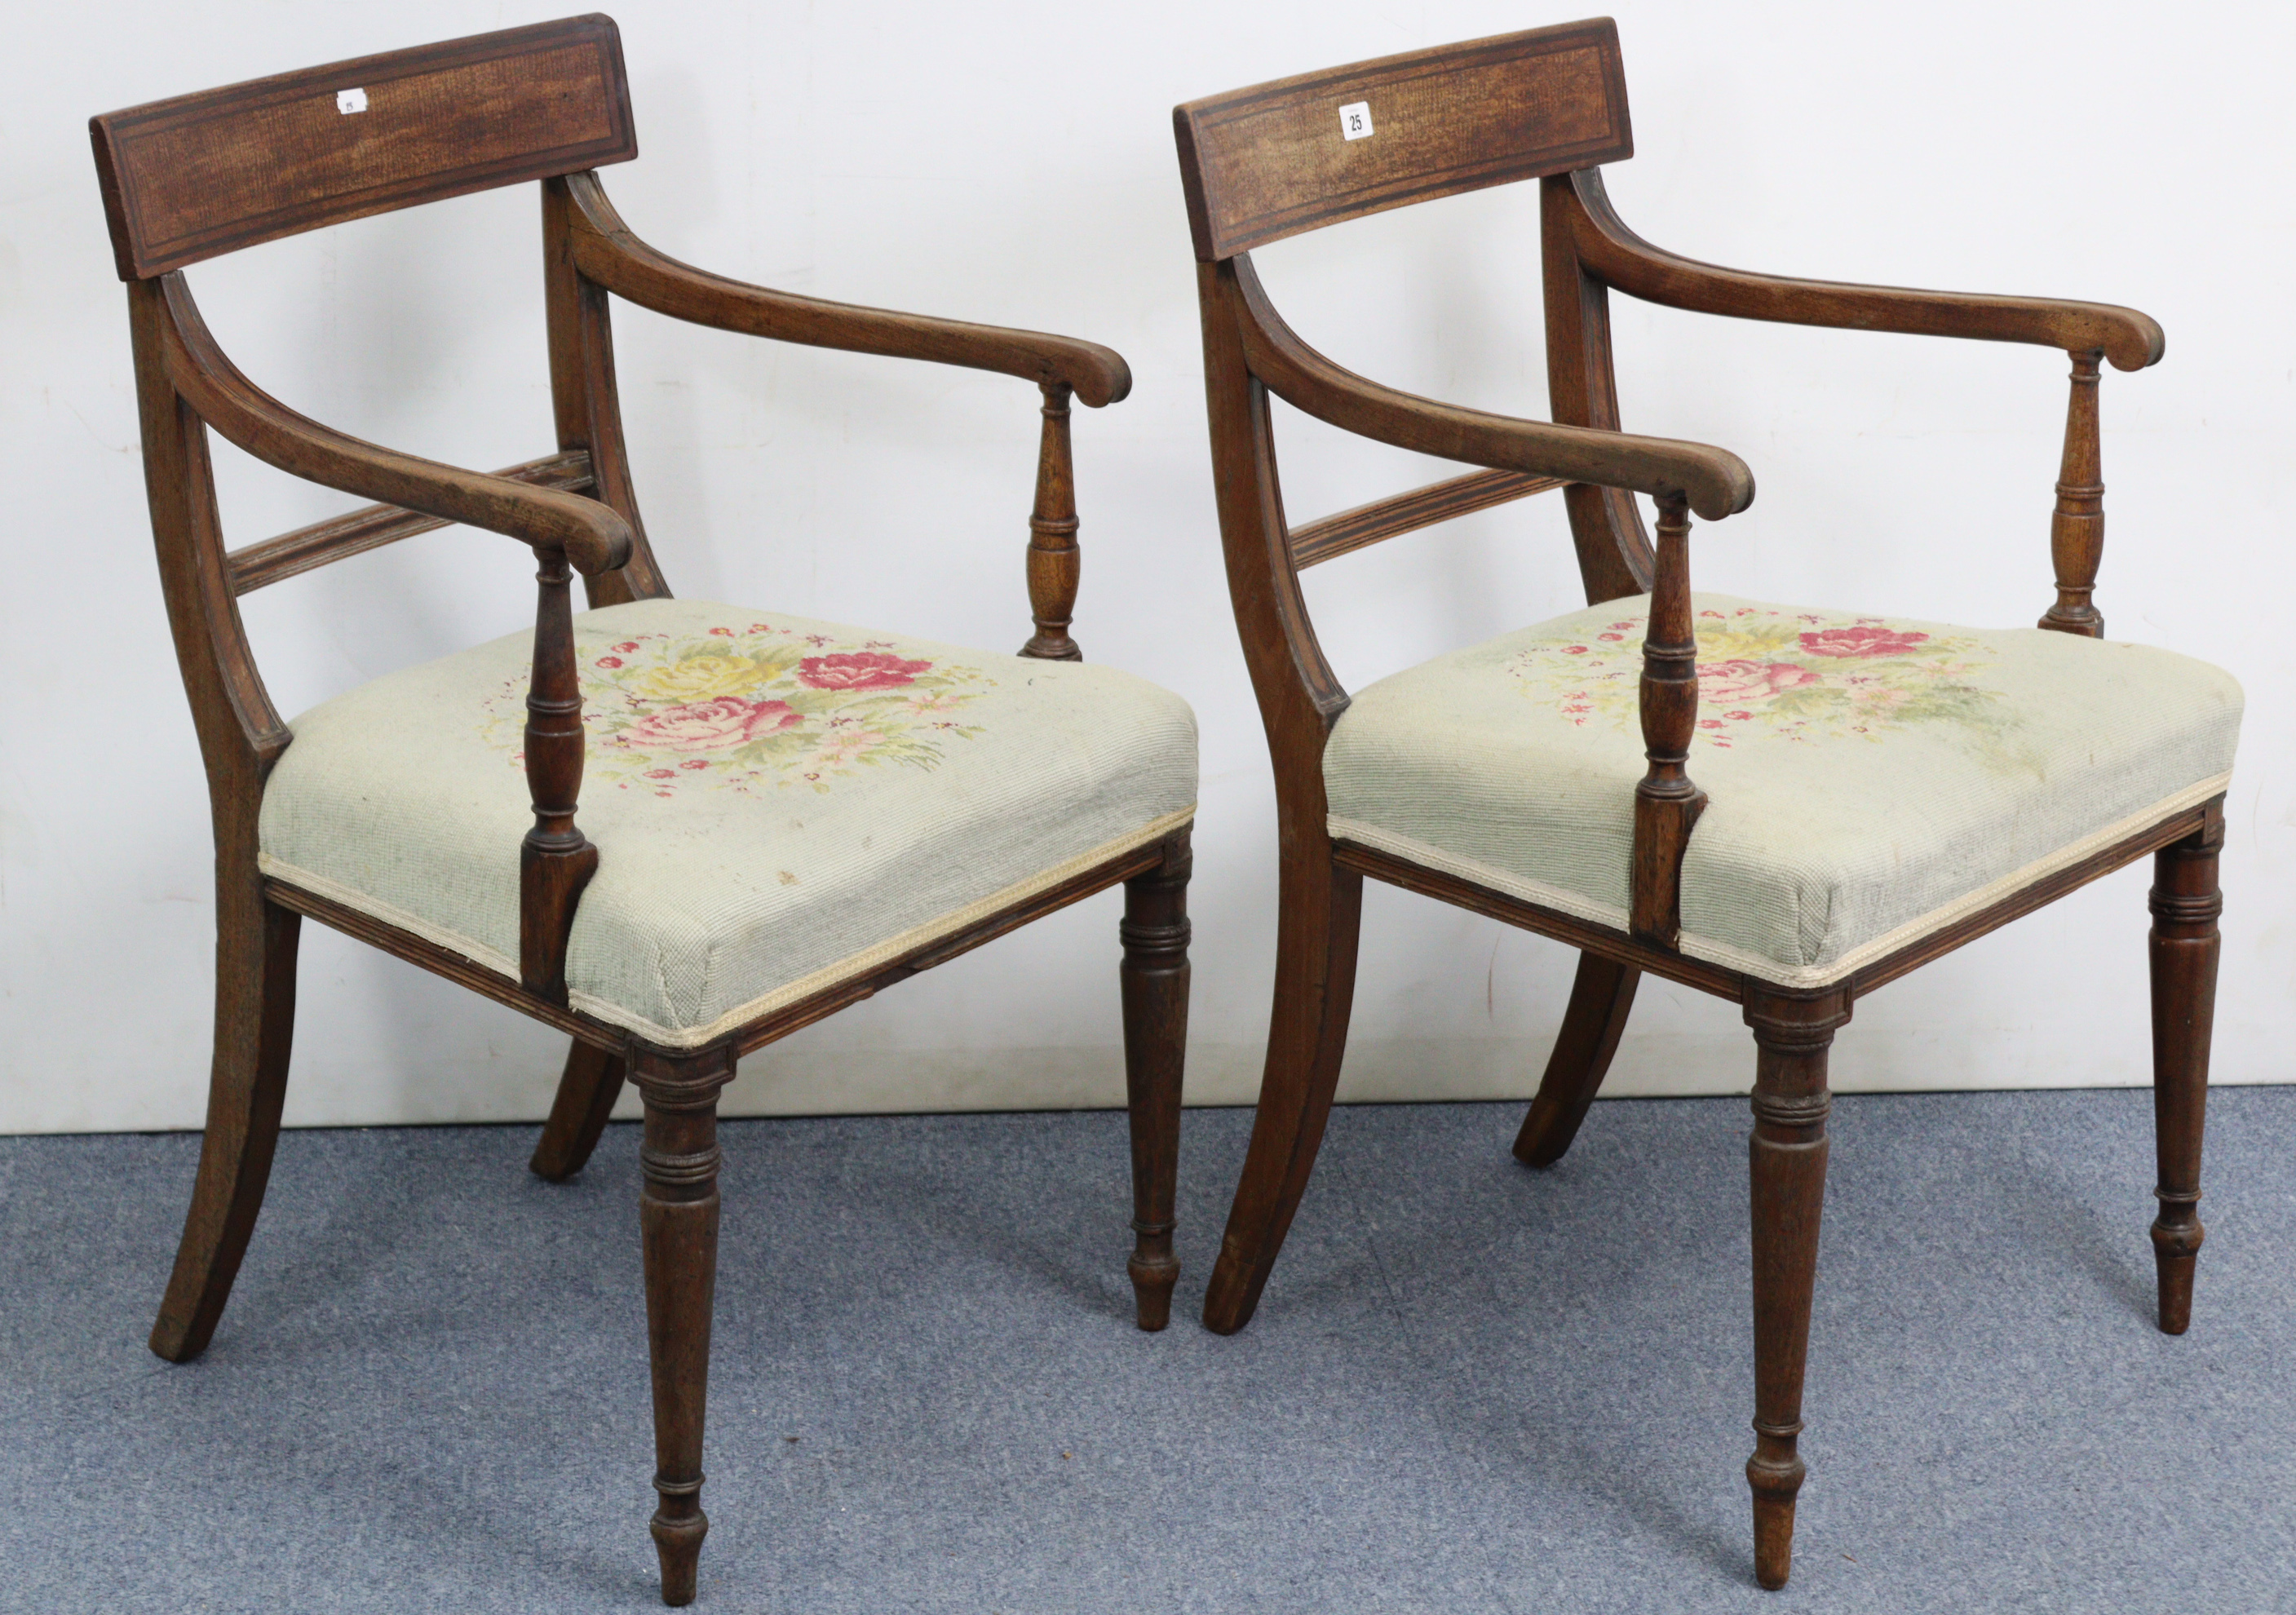 A pair of regency mahogany bow-back carver chairs with padded seats, on turned tapered legs.